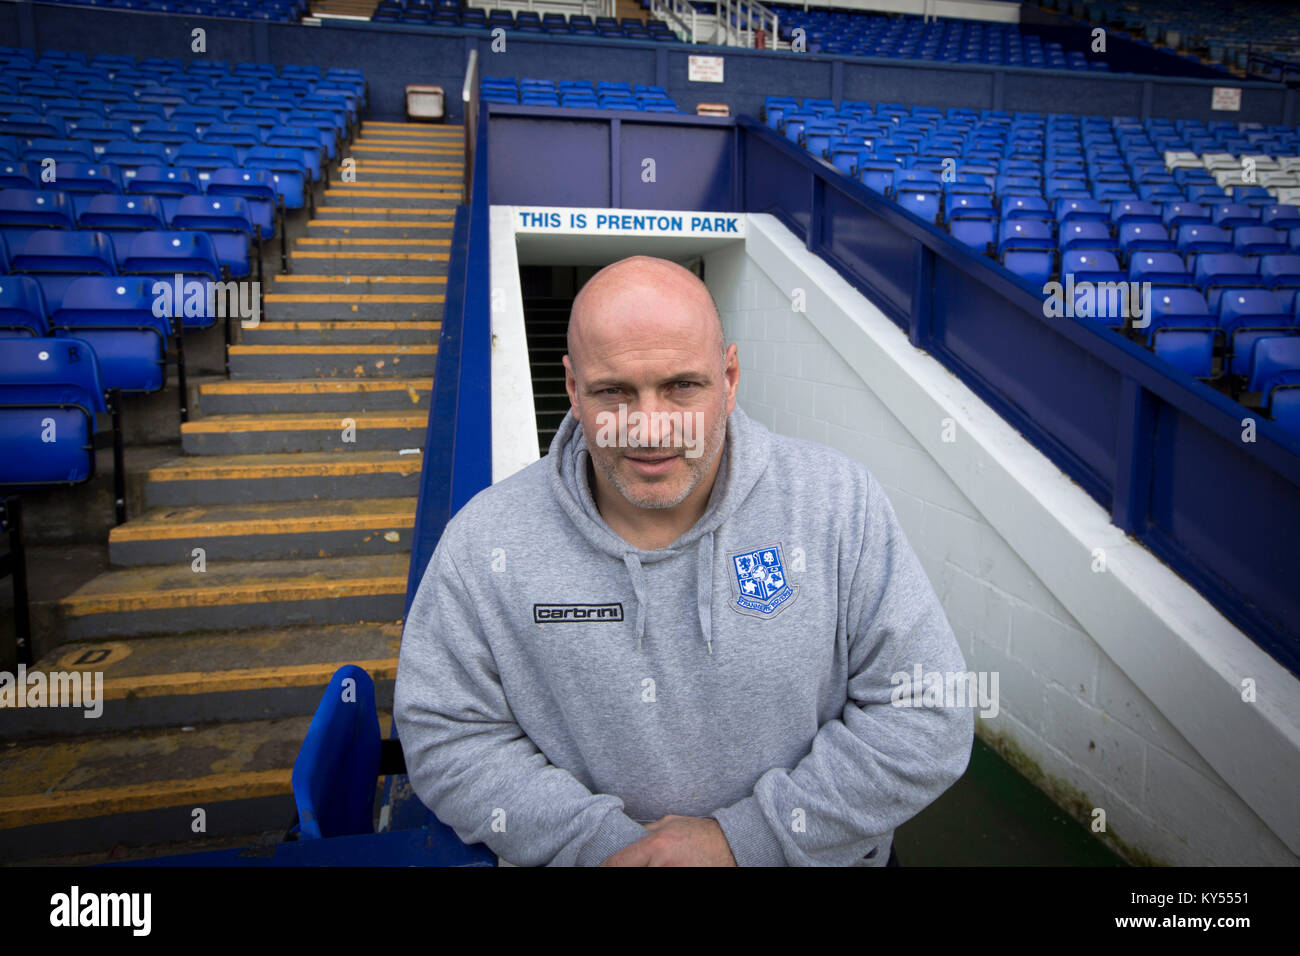 Gary Brain, manager of Tranmere Rovers, pictured at the football club's Prenton Park stadium. Brain was appointed manager of the club in the summer of 2015, following their relegation down to the National League. Rovers had been members of the Football League from 1921 until their demotion to England's fifth tier. Stock Photo